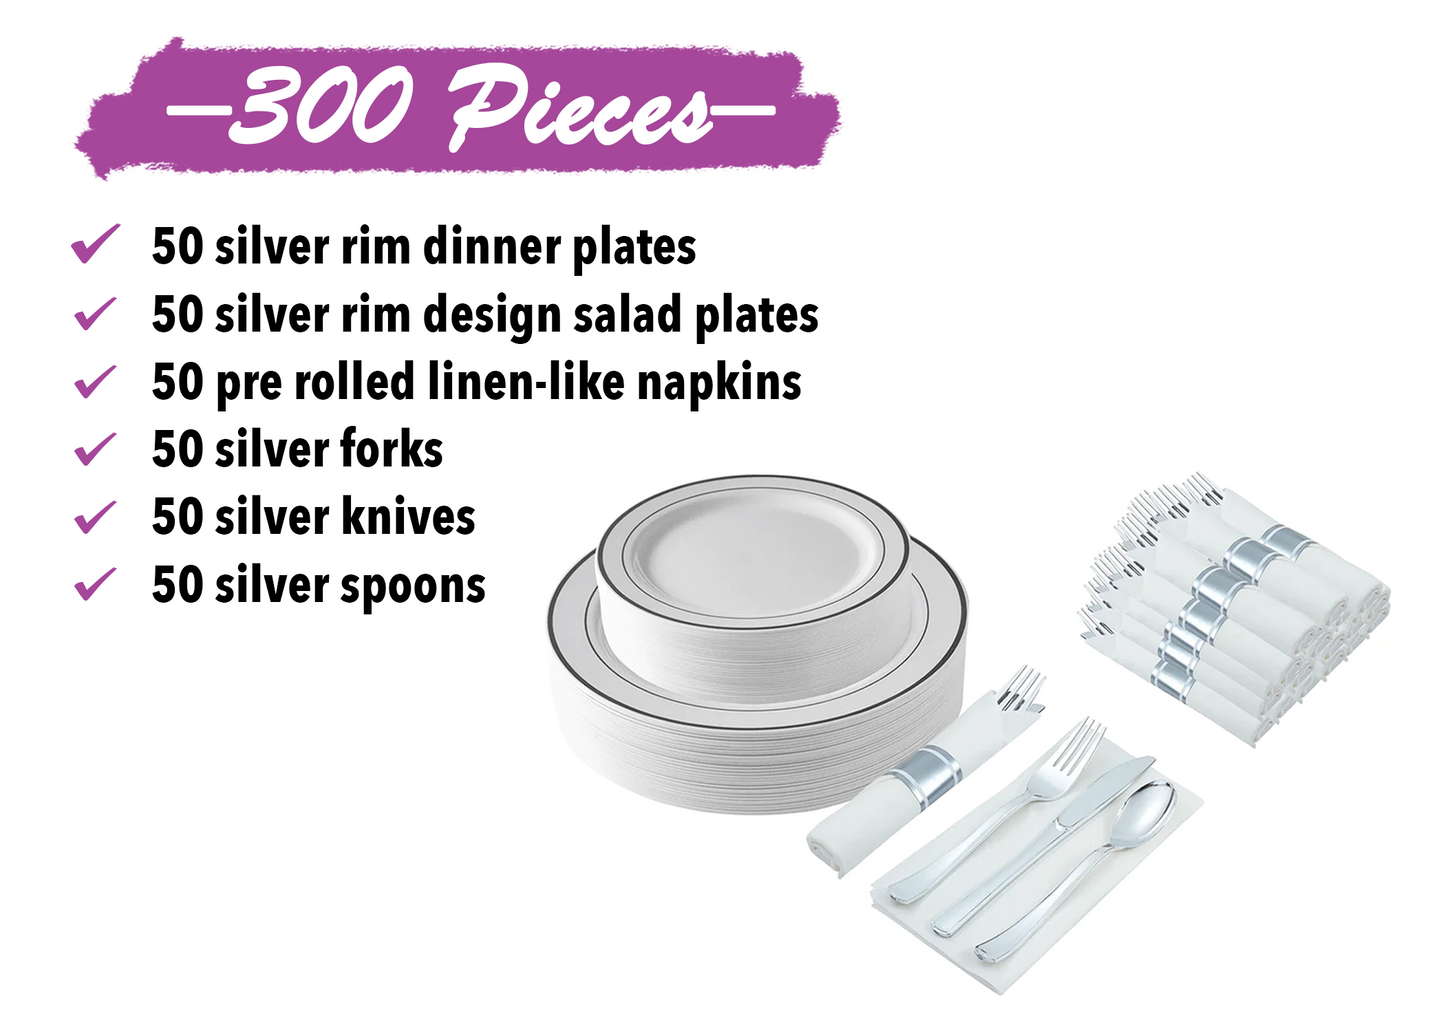 300-piece Silver Dinnerware Set for 50 guests Includes: 100 silver rim plastic plates & 50 pre-wrapped silver-colored silverware sets